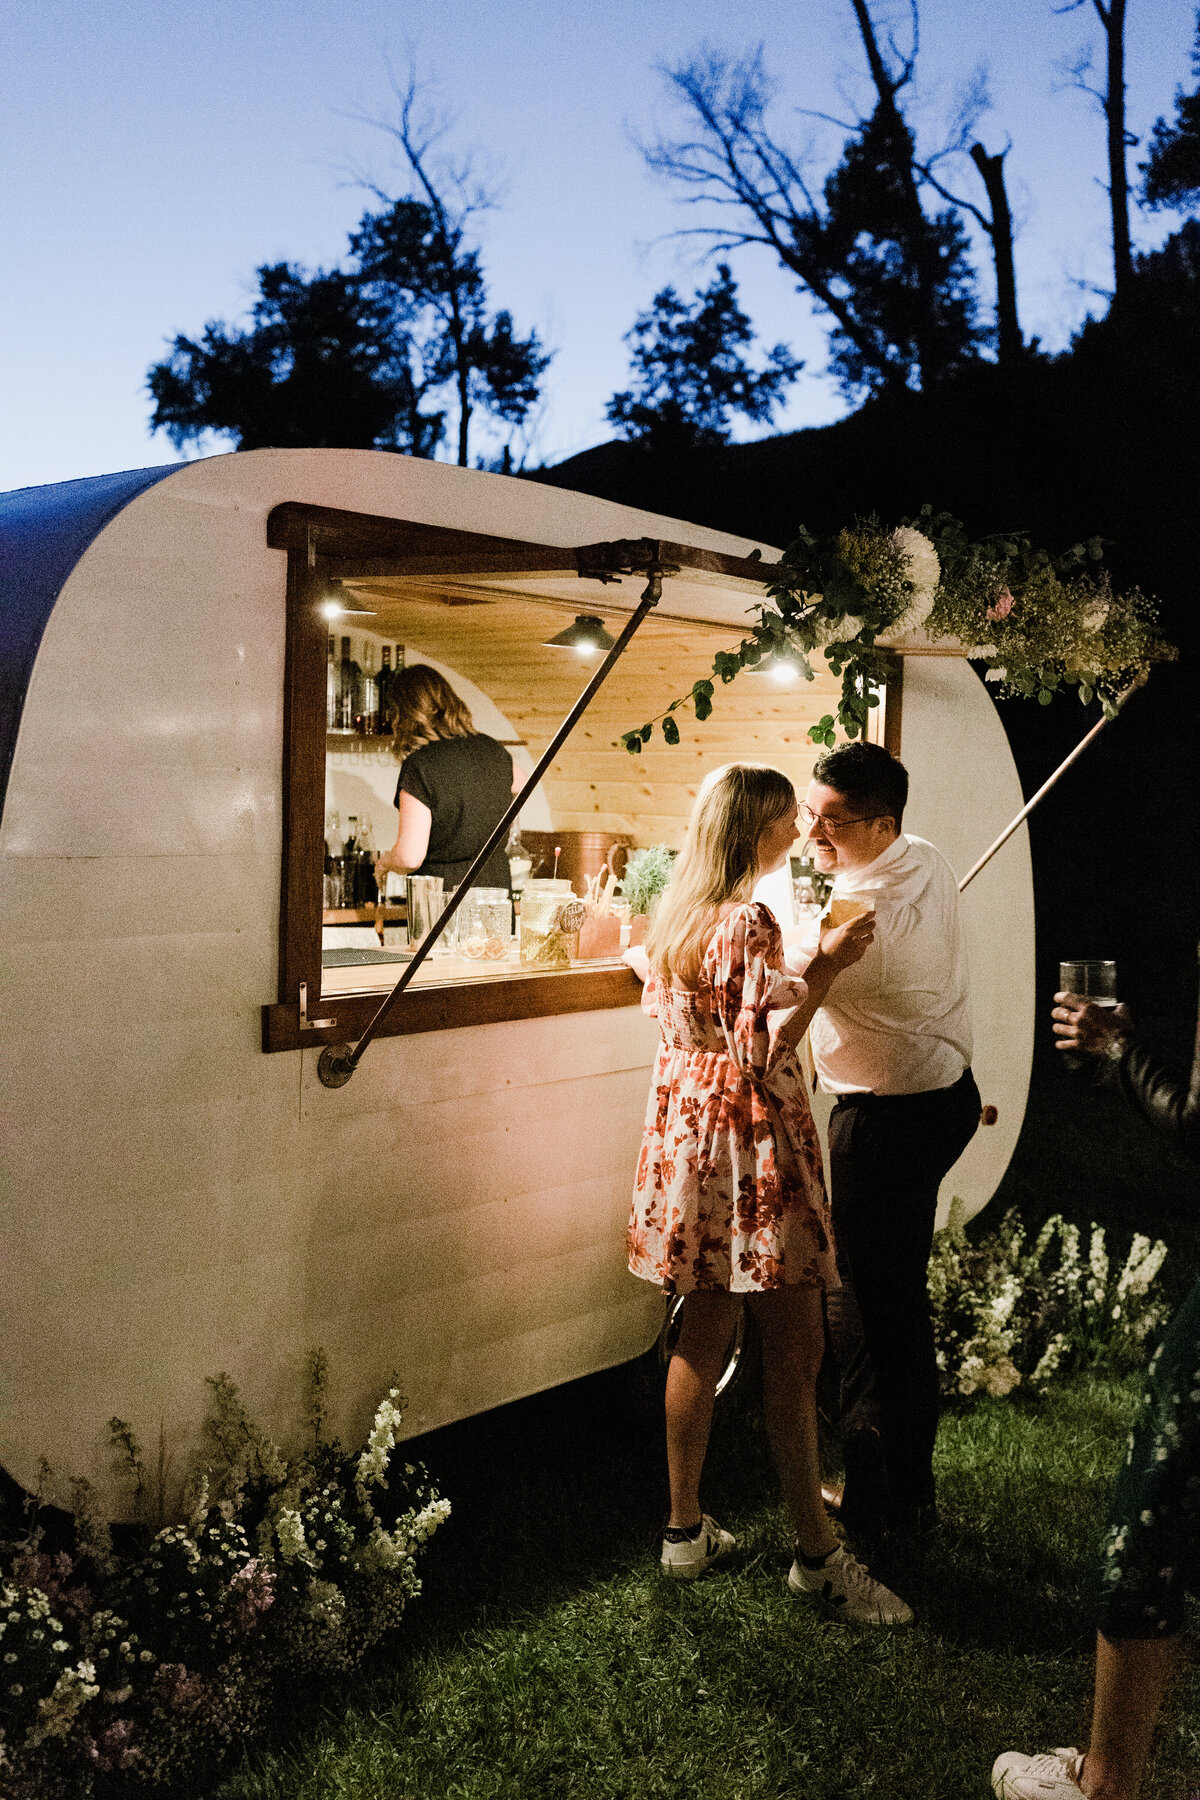 Guests ordering drinks from mobile cocktail bar at Dallenbach Ranch Wedding